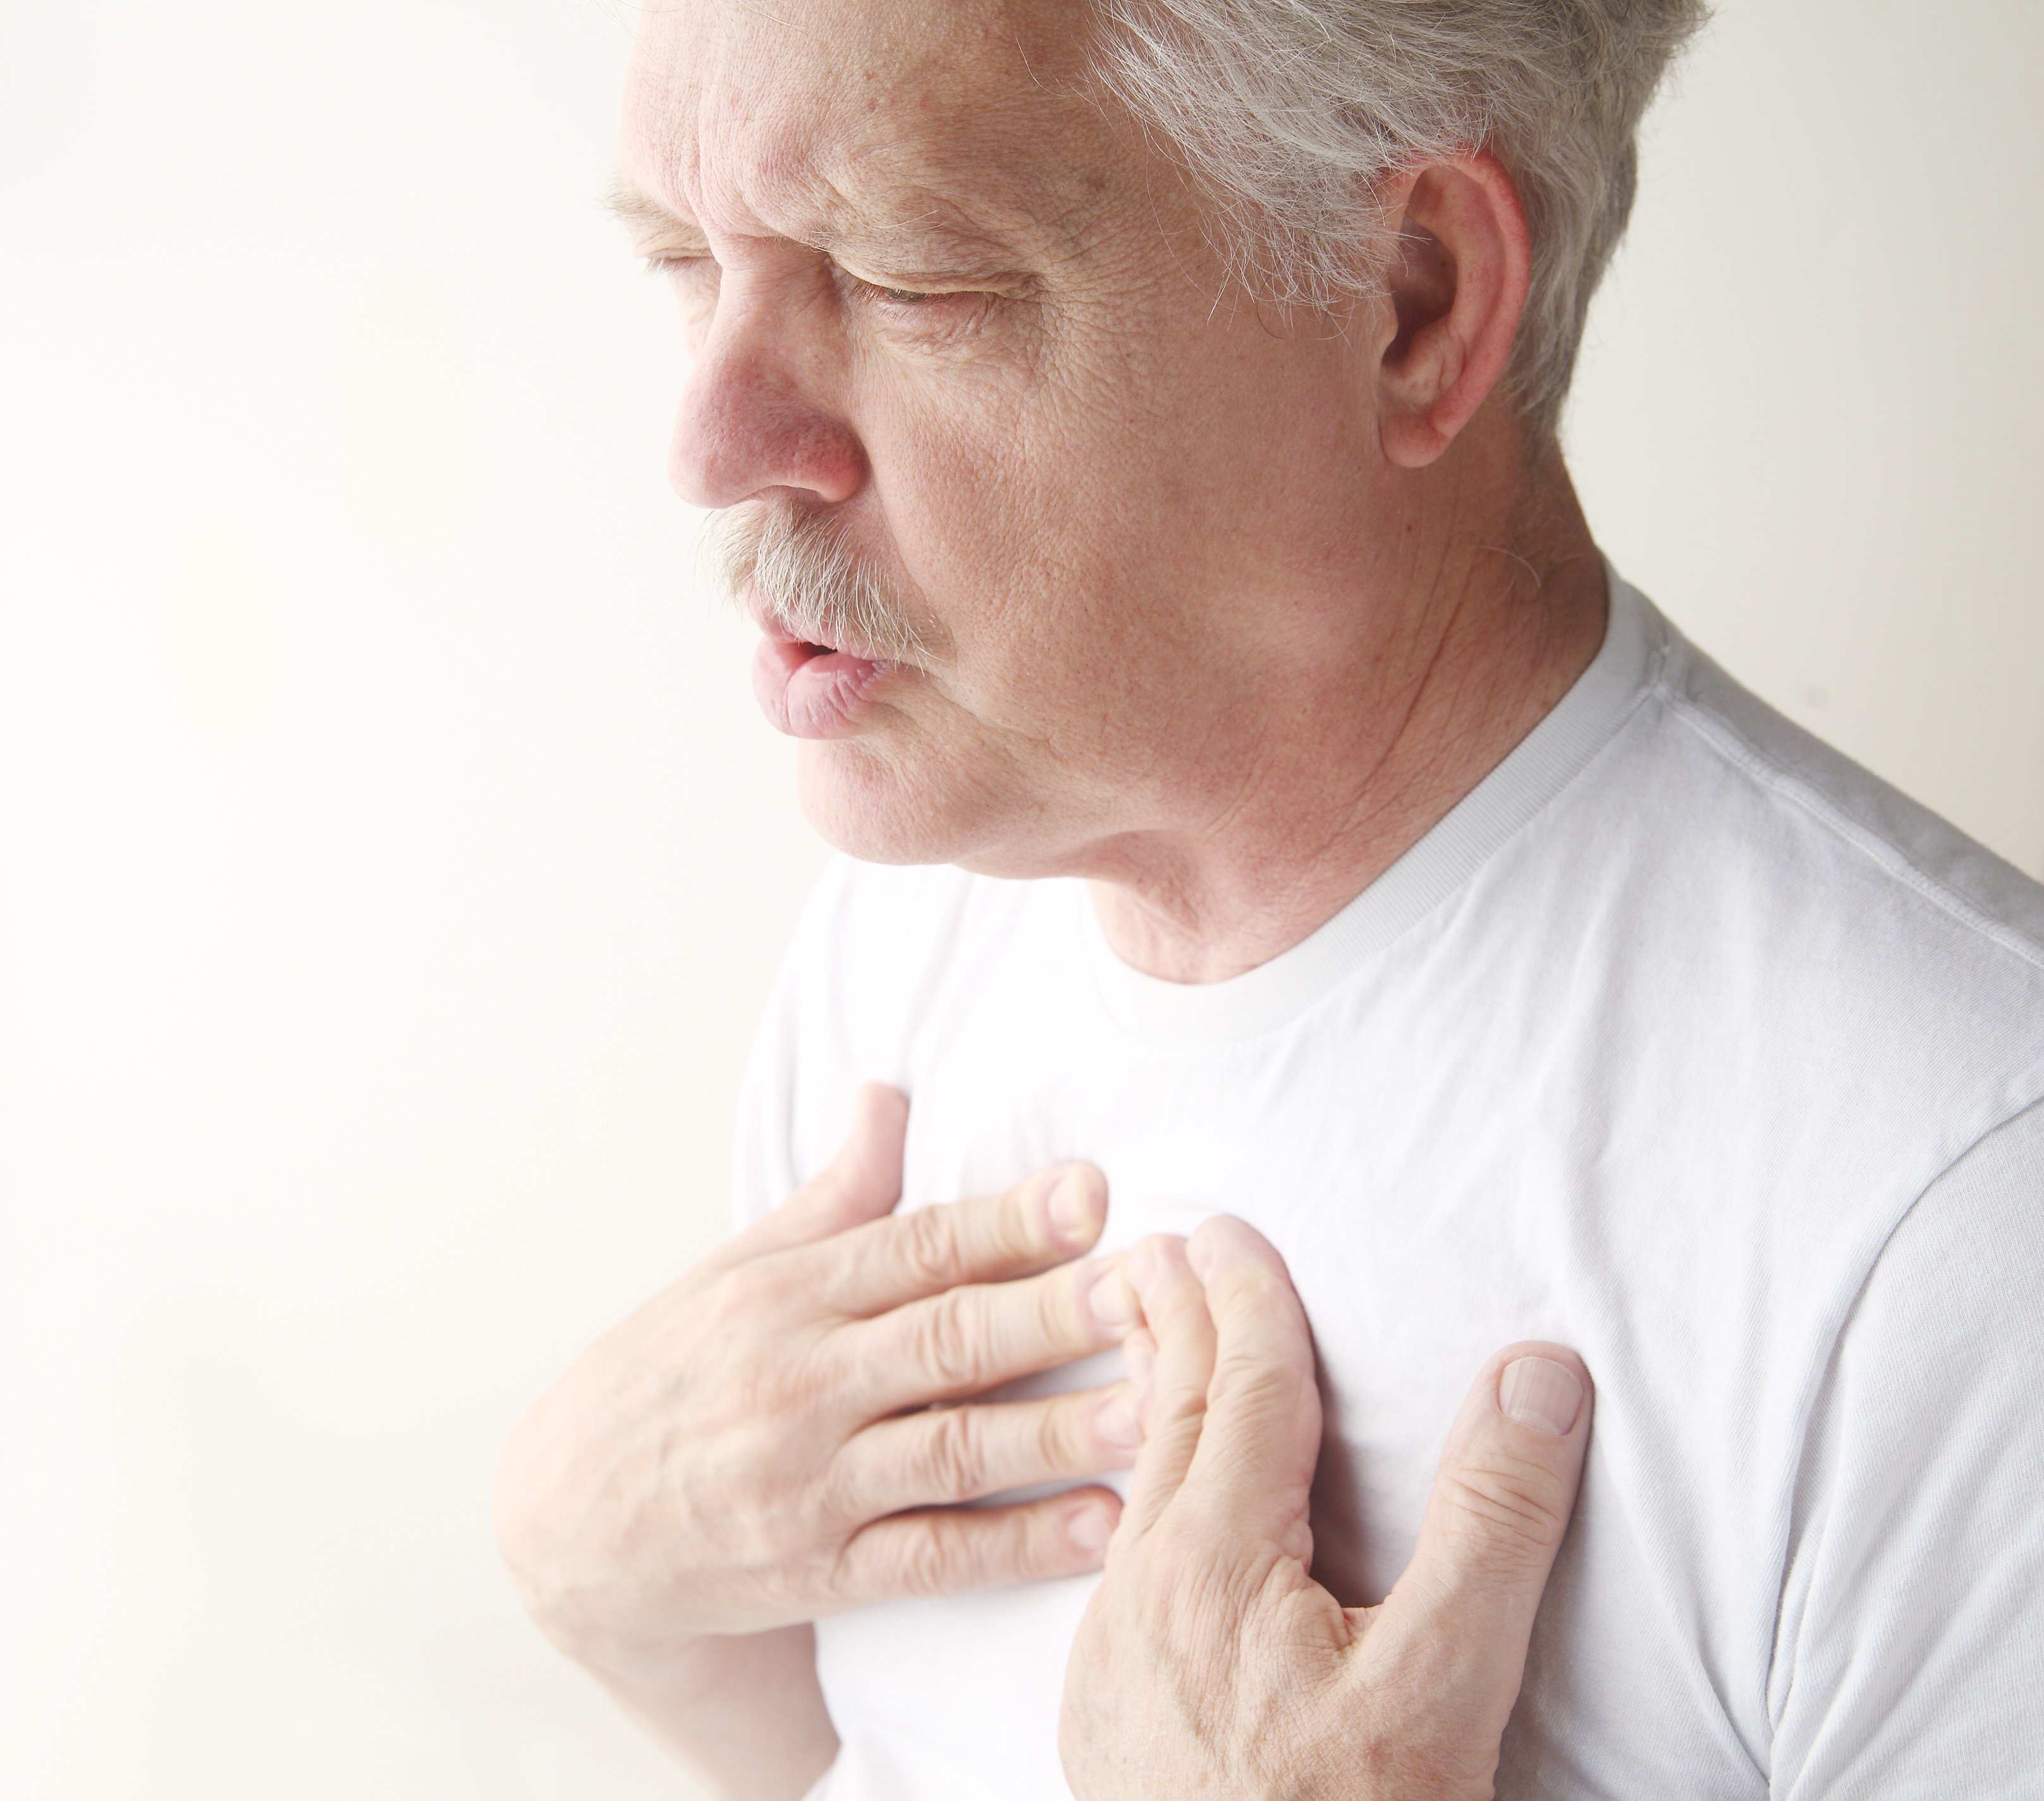 Common Breathing Problems in Older Adults & What You Can Do About Them